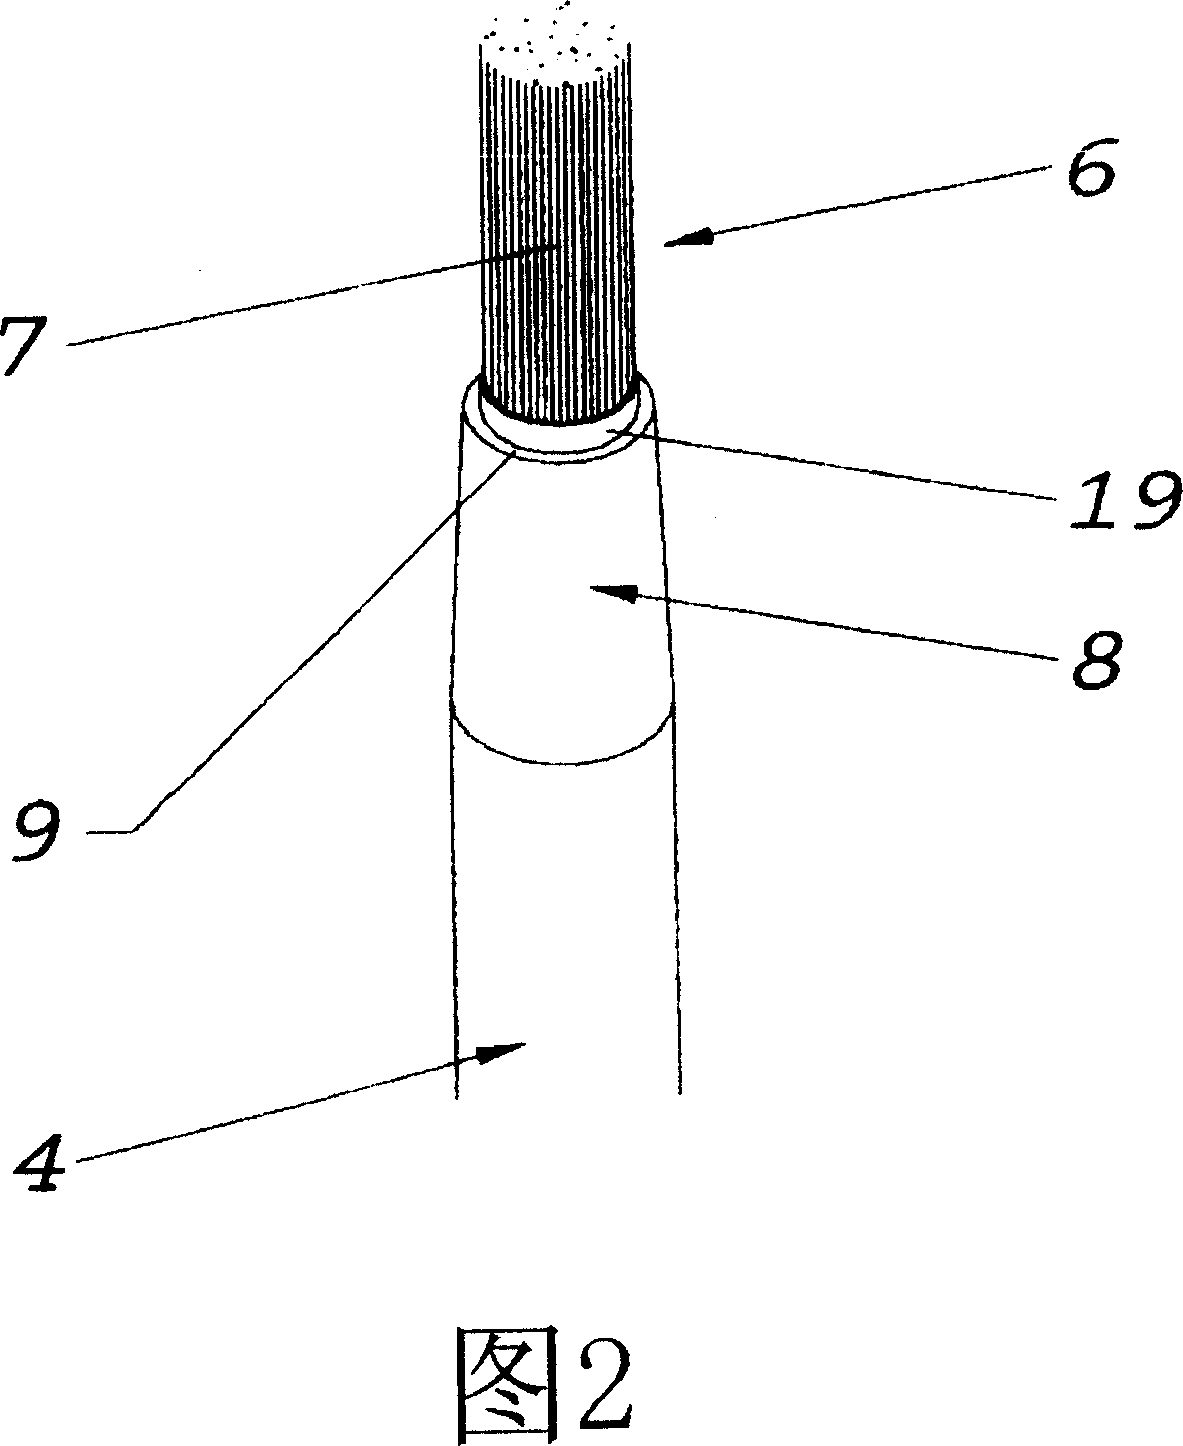 Applicator for cosmetic substances